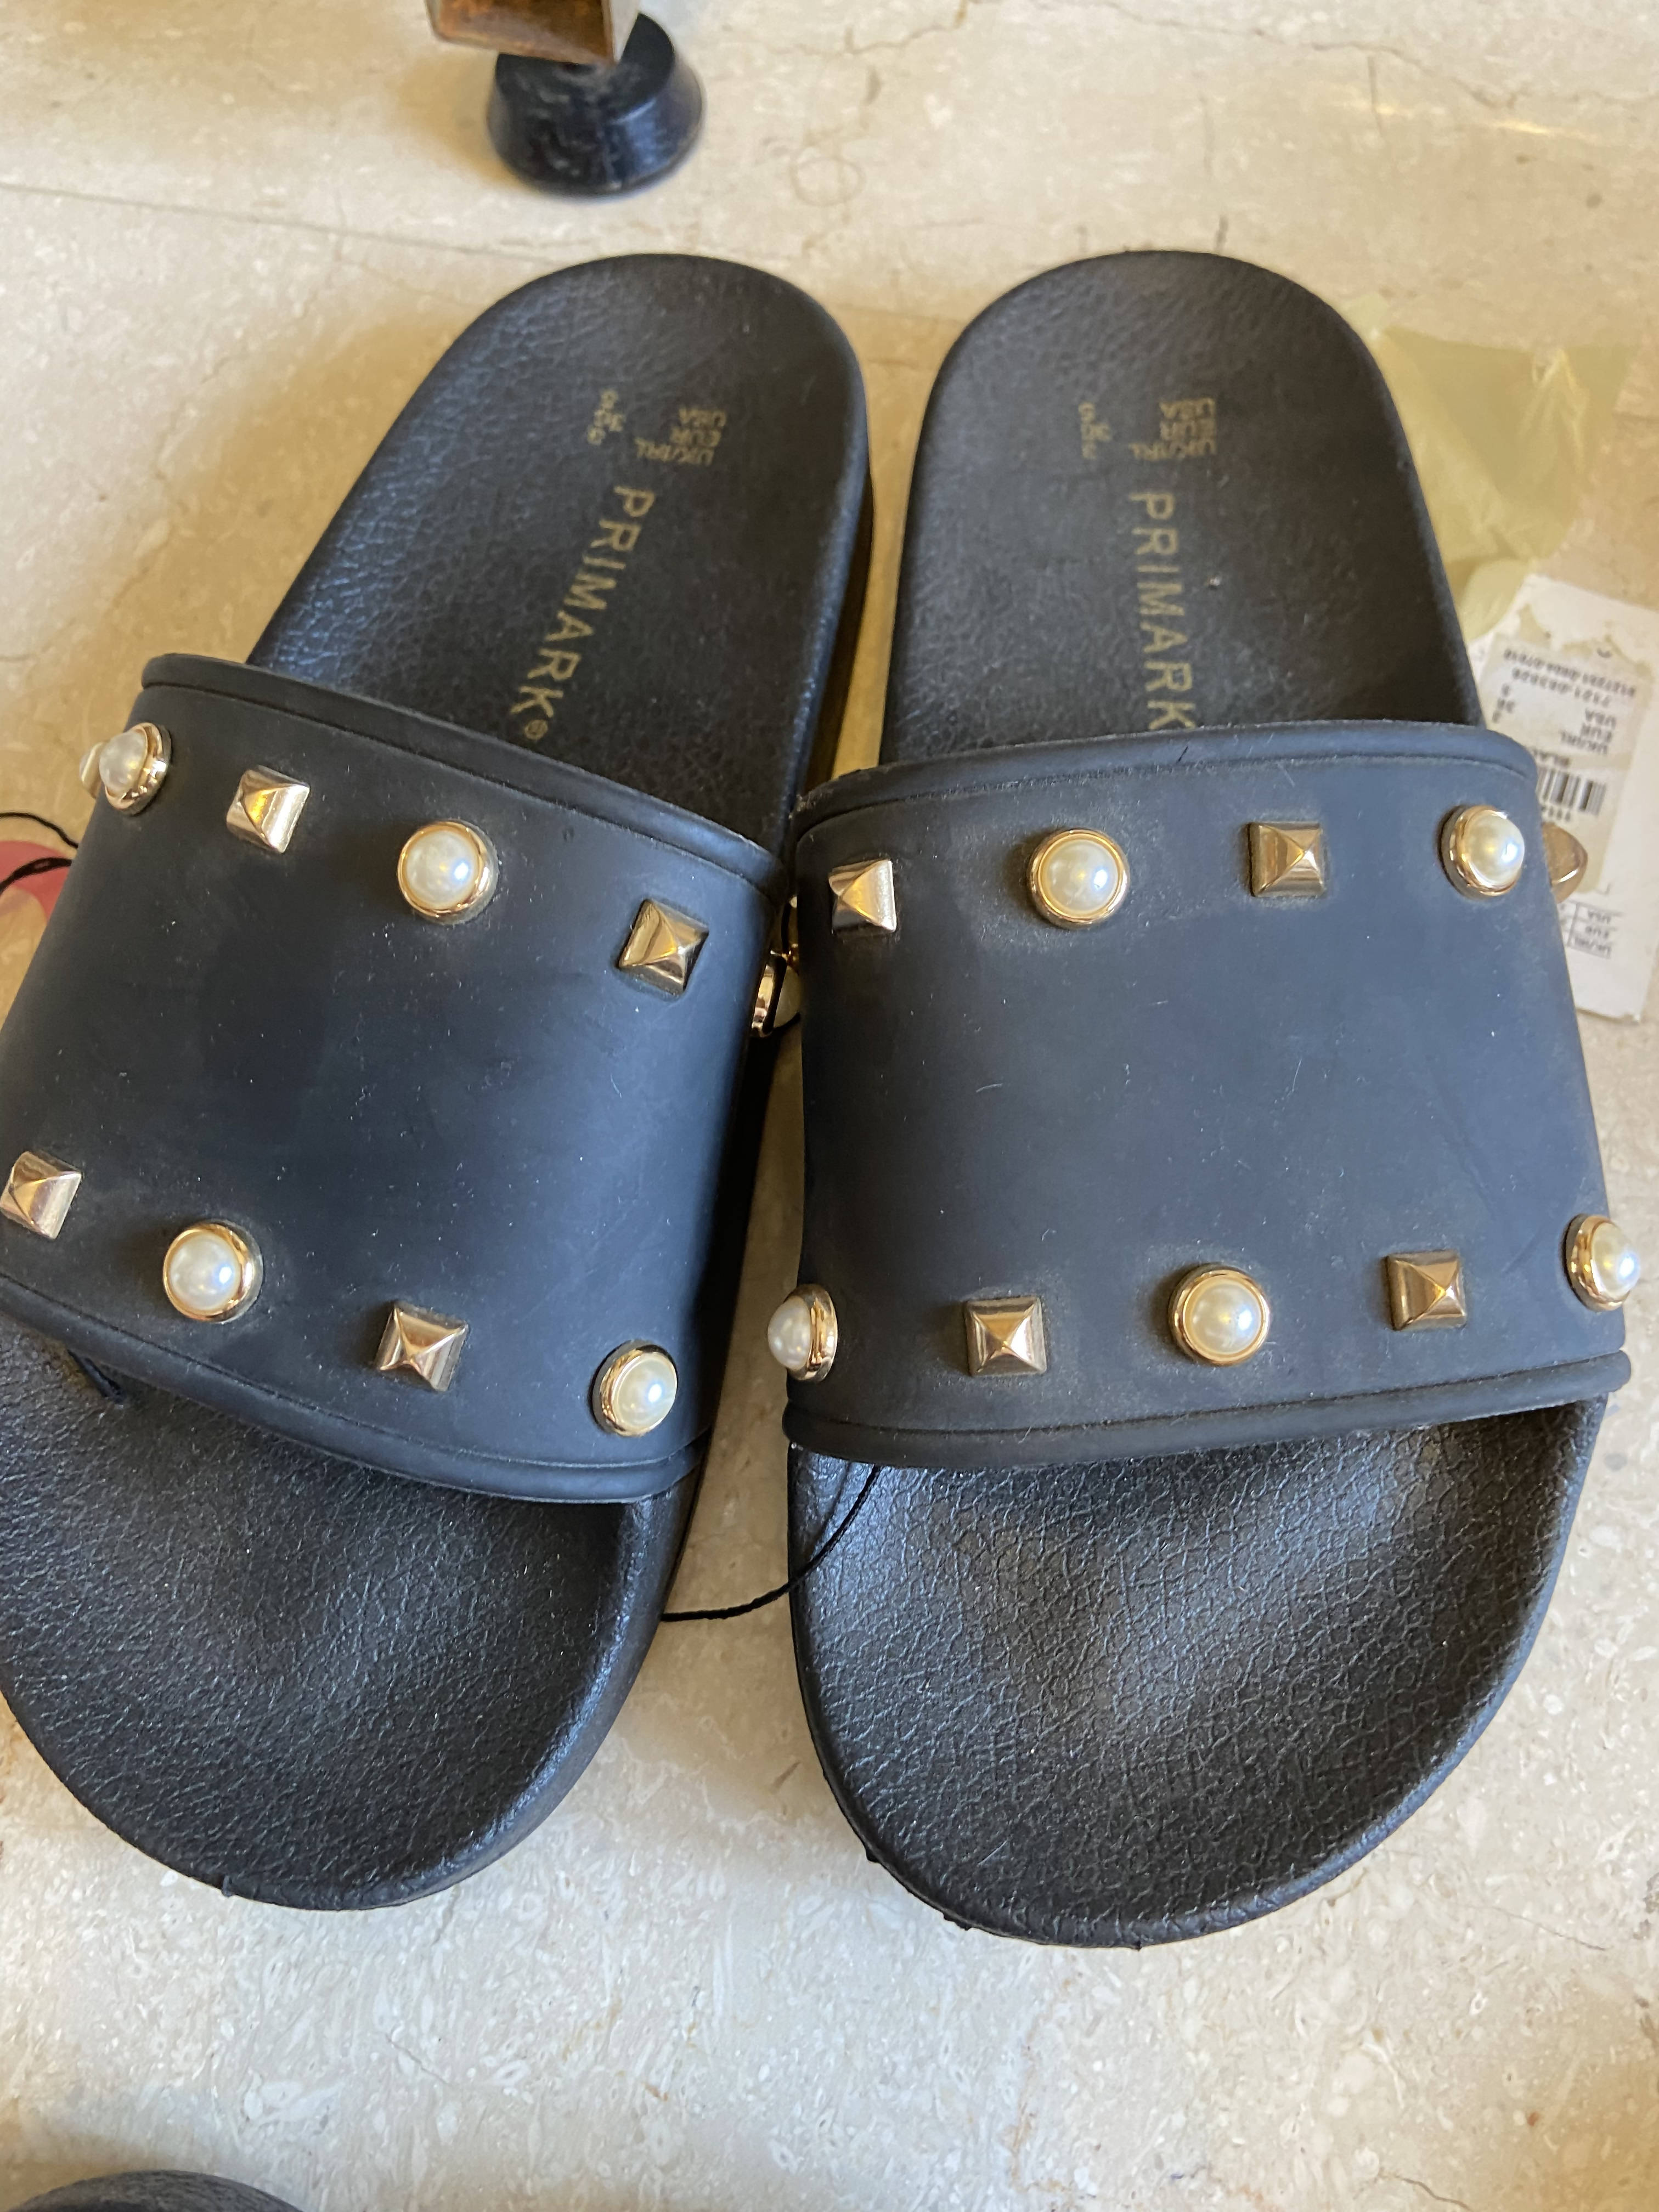 Primark | Women Shoes | Stud slippers sandals | UK Size 3 | Eur Size 36 | Brand New